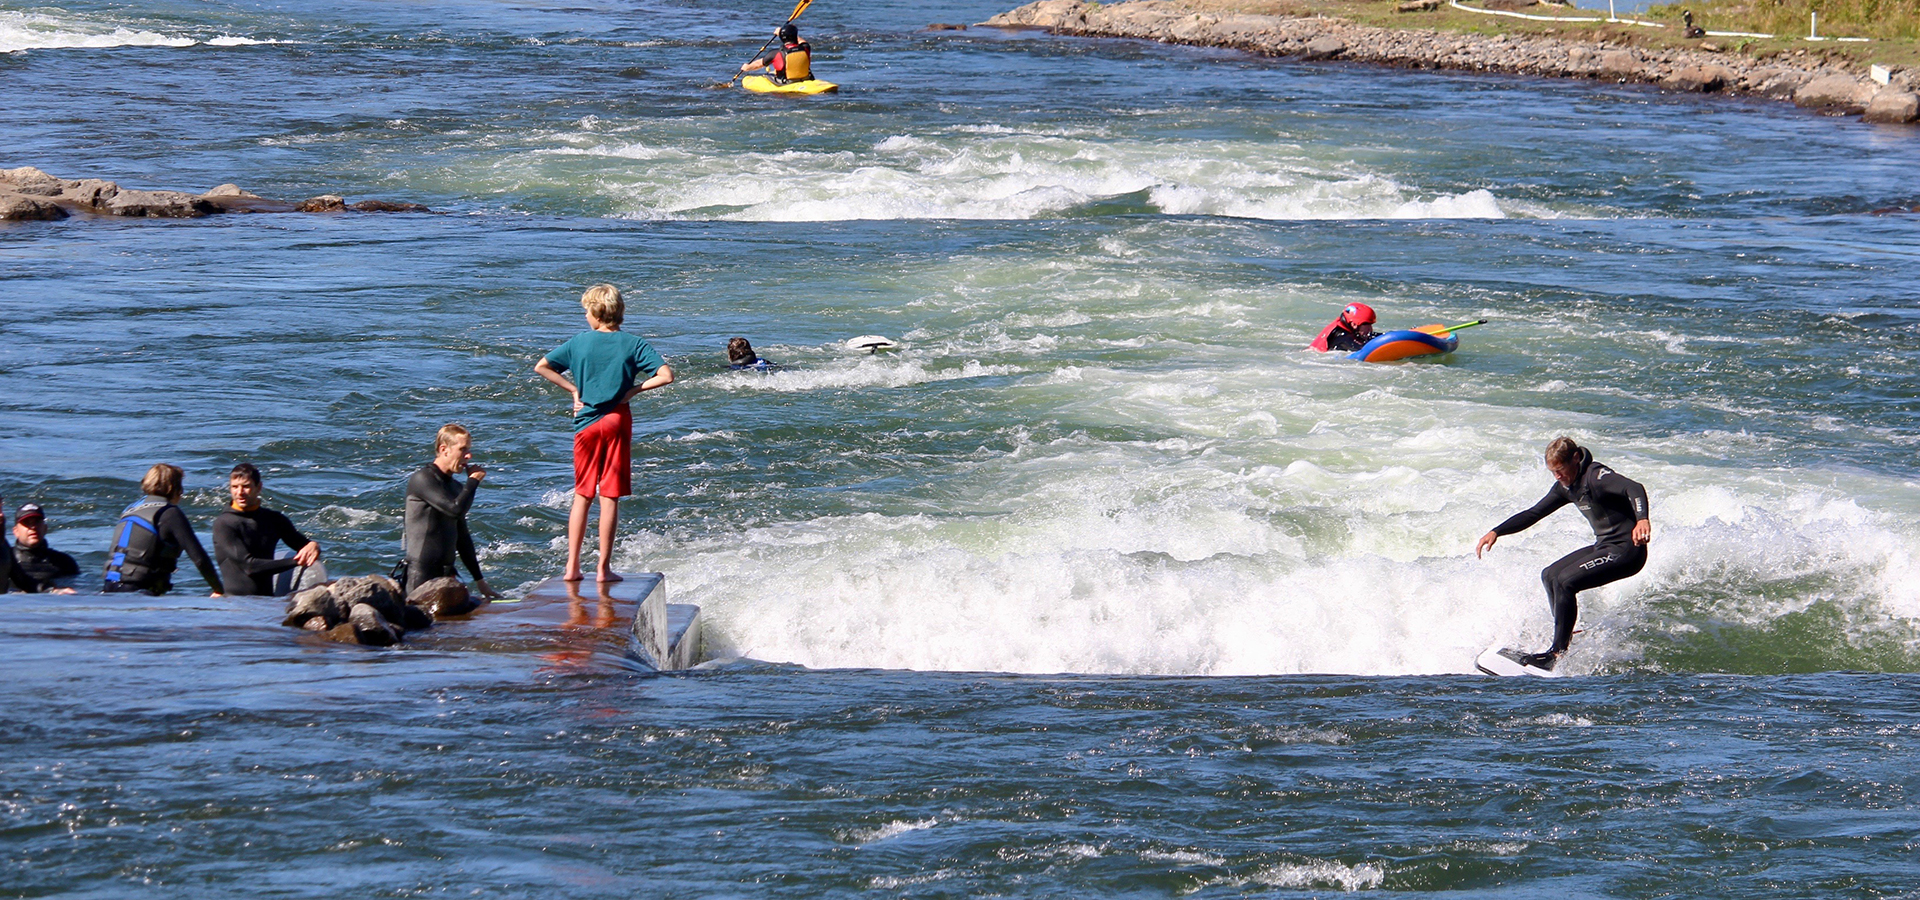 Surfers on the greenwave at Bend Whitewater Park.